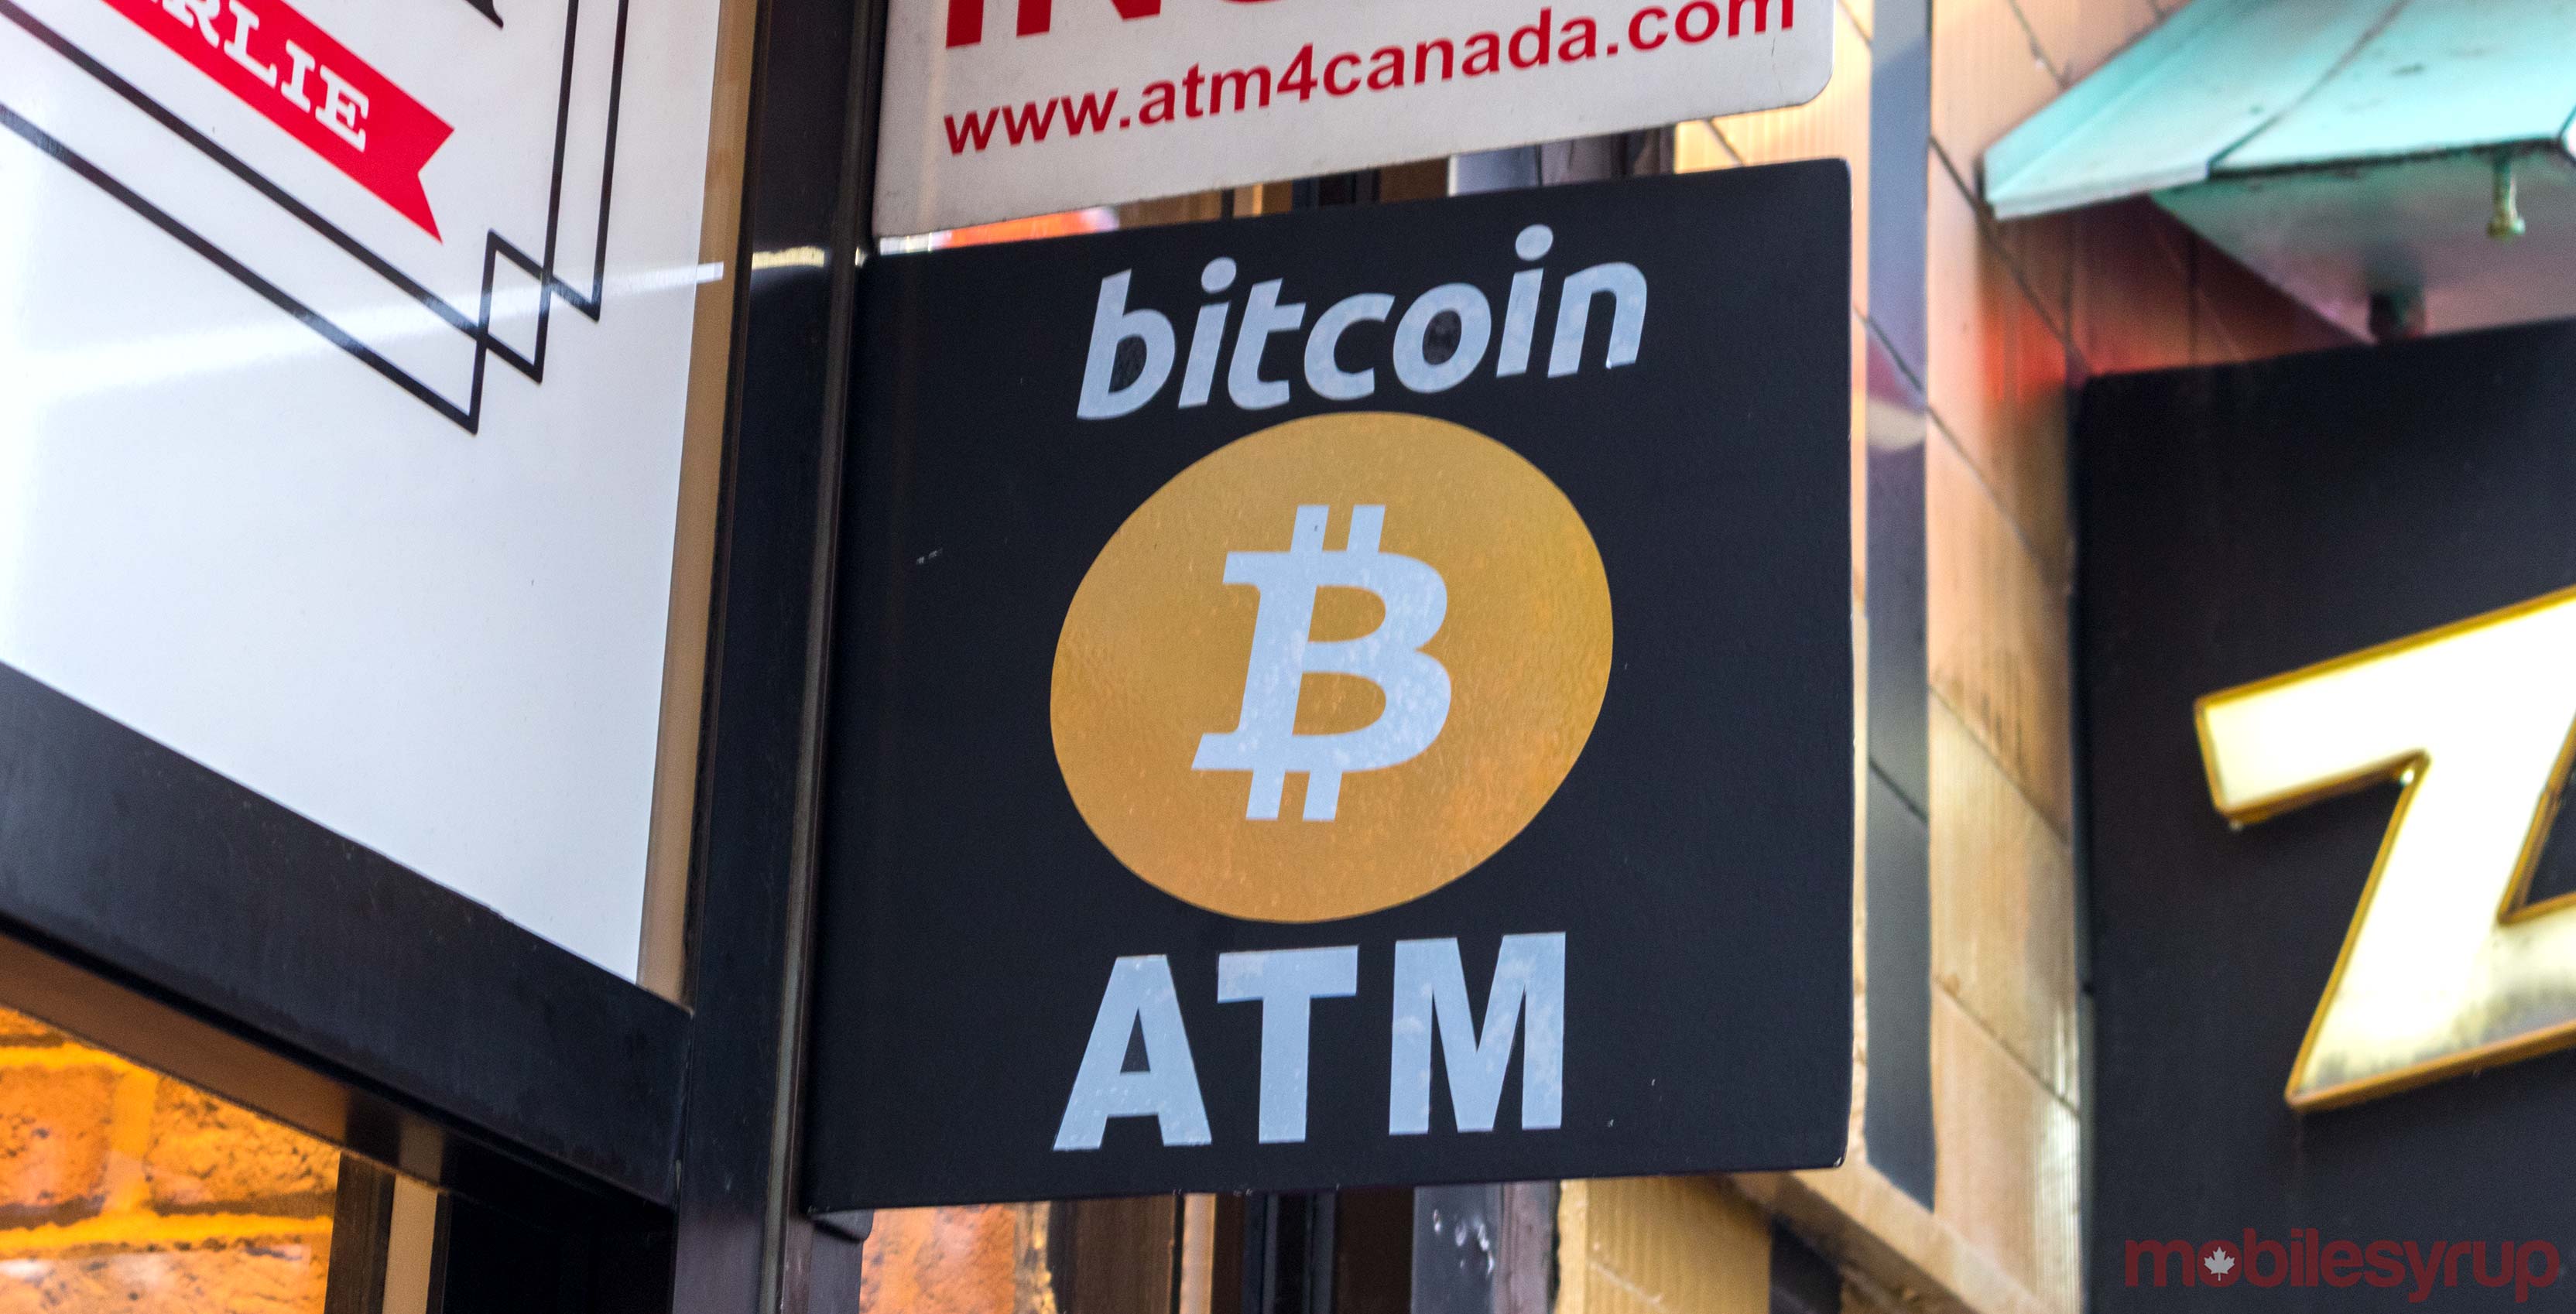 Town of Innisfil to accept Bitcoin as payment for property taxes